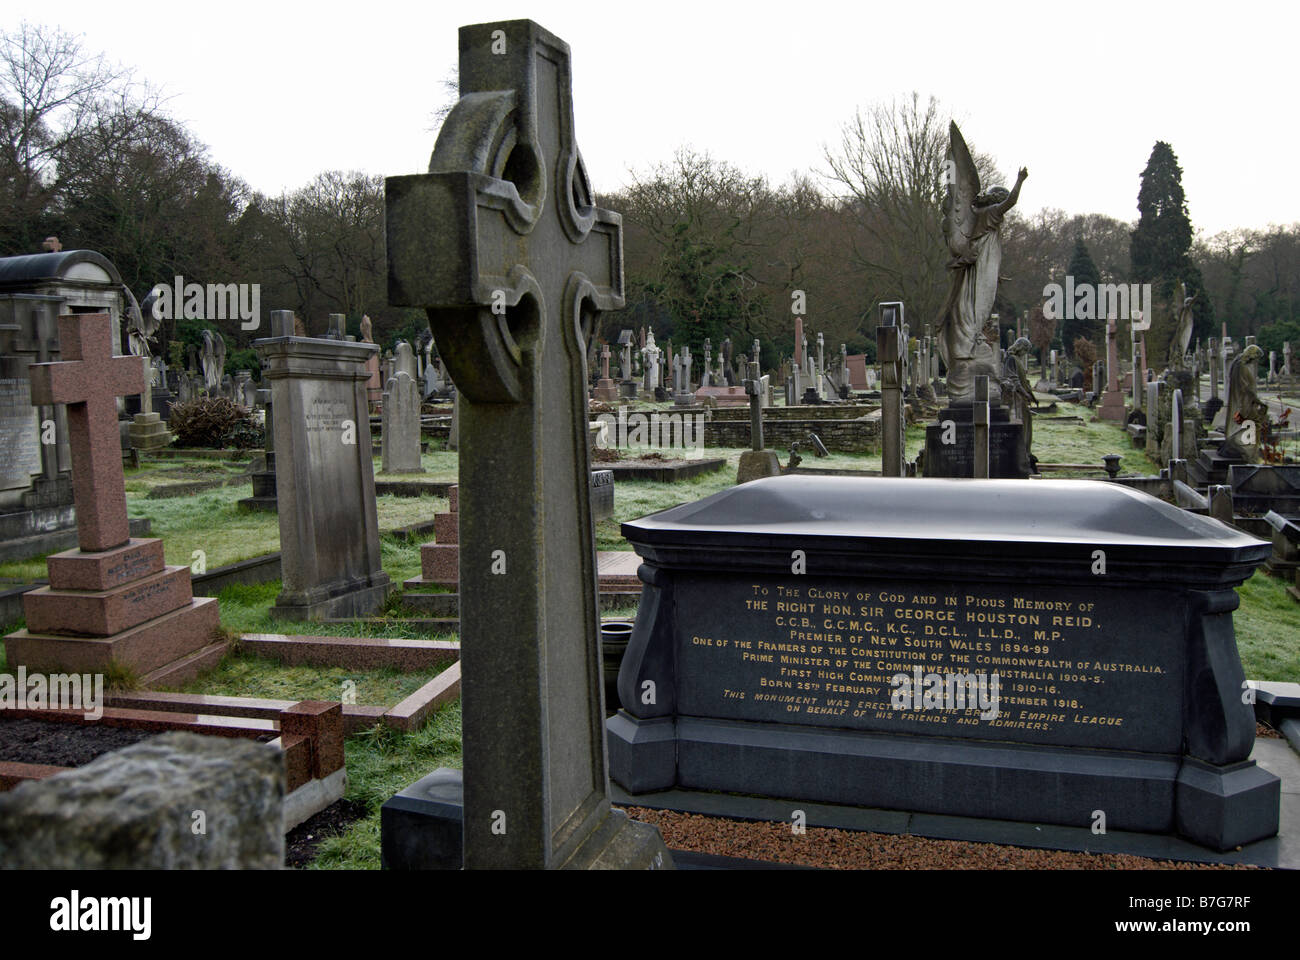 the sarcophagus of sir george houston reid, a prime minister of australia, amid other graves at putney vale cemetery, london, england Stock Photo